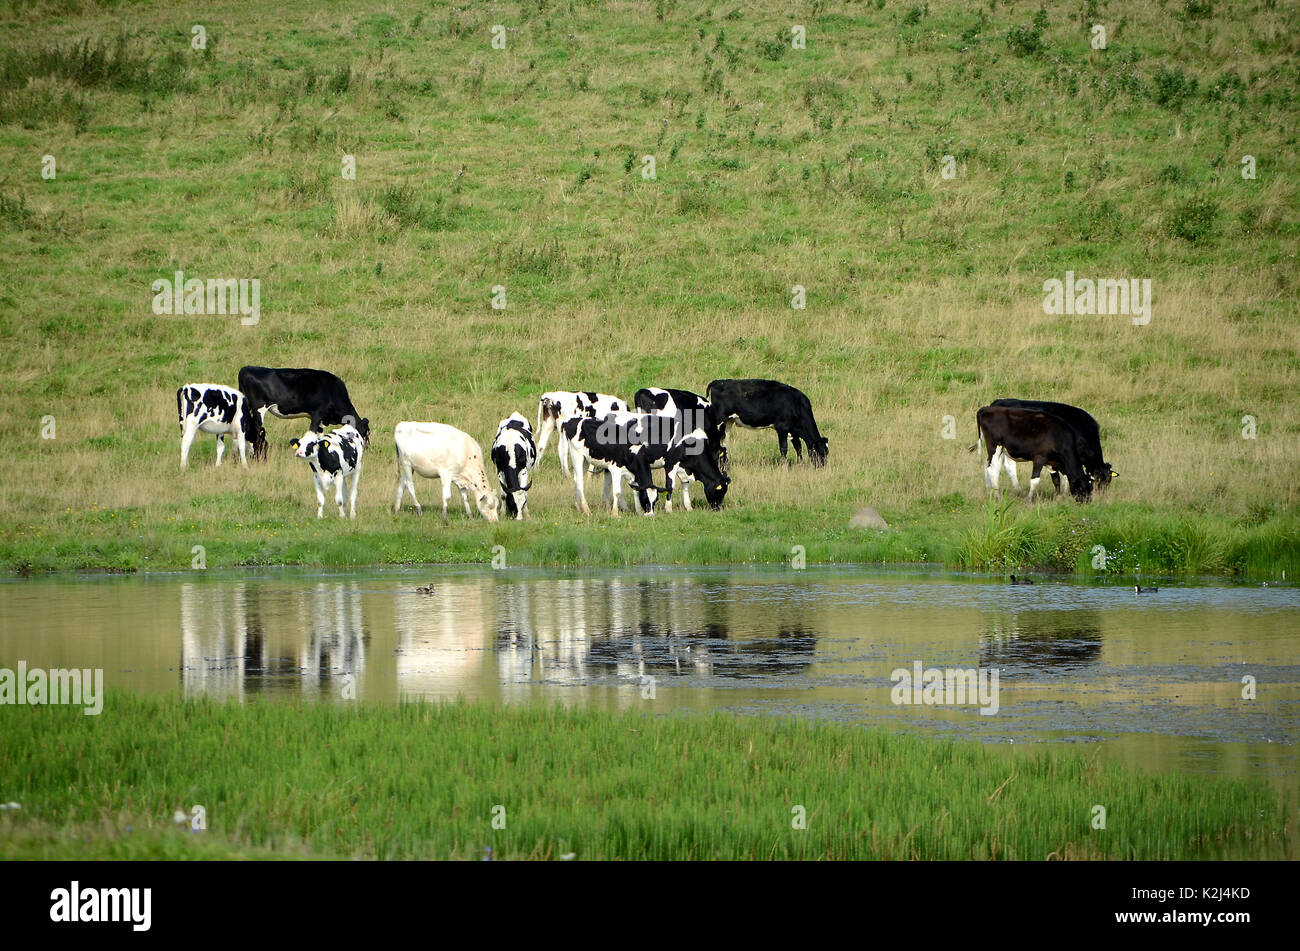 Danish Black and White cattle grazing on a sloped field, mirroring themselves in a pond. Stock Photo